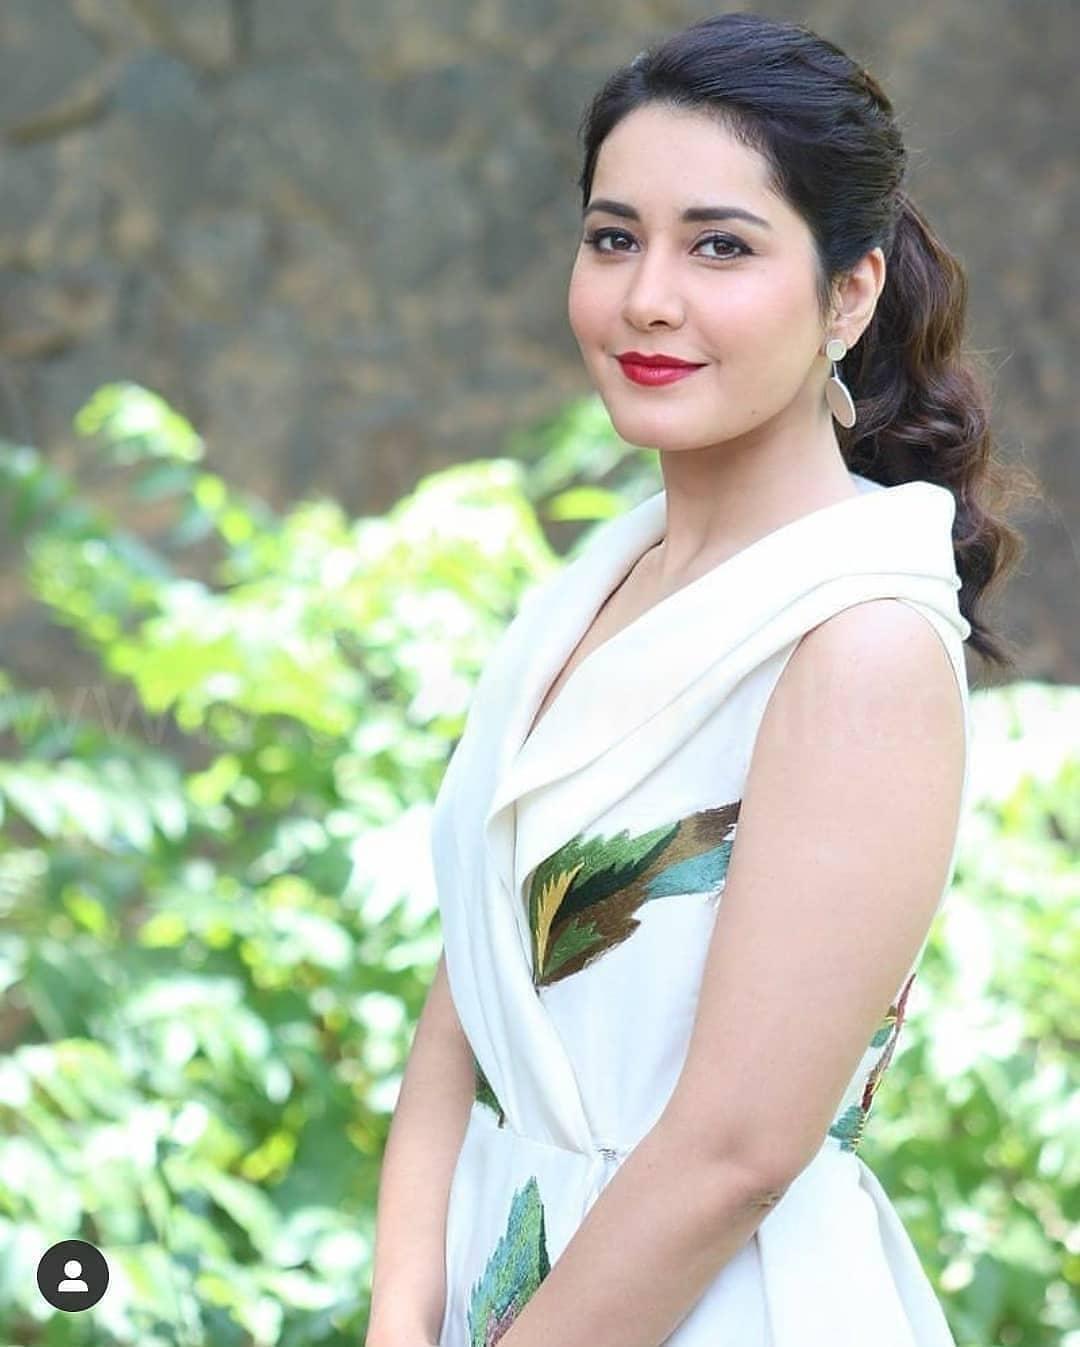 South Indian Actress Rashi Khanna exclusive hot and sexy photoshoot | hot  and sexy photos Photos: HD Images, Pictures, Stills, First Look Posters of  South Indian Actress Rashi Khanna exclusive hot and